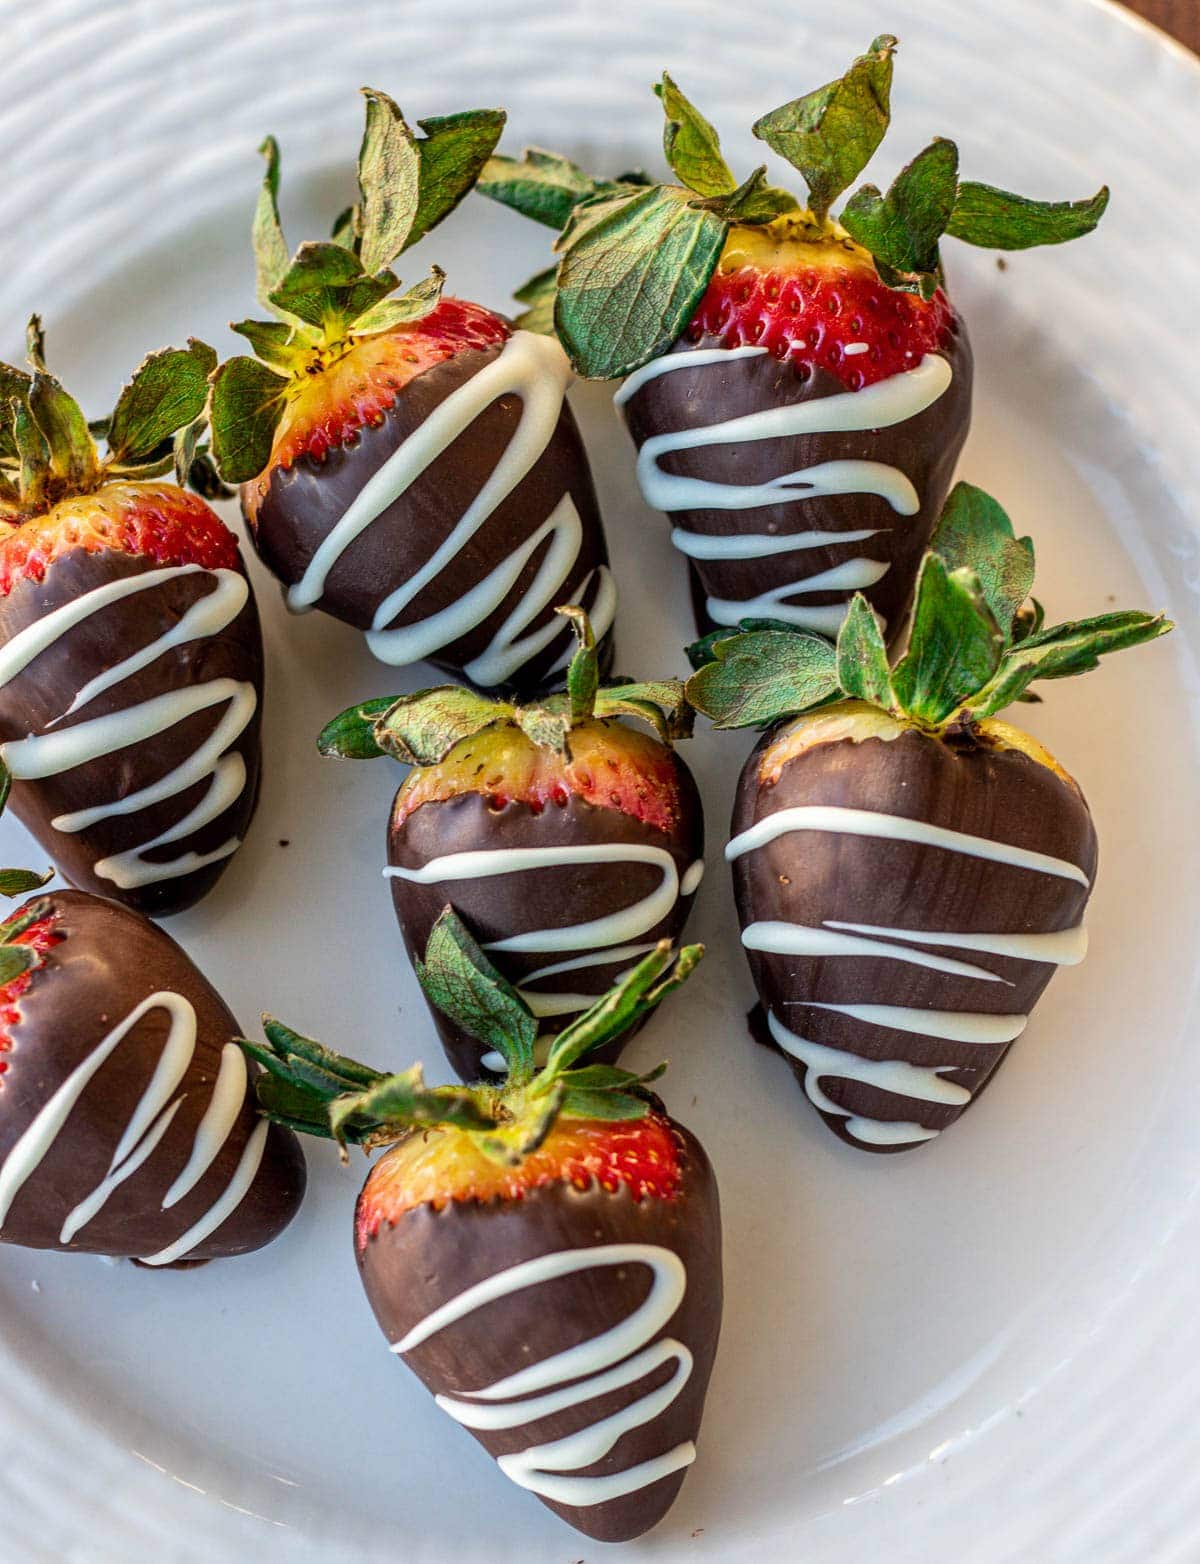 Chocolate Covered Strawberries (Best Recipe Tips) - Fifteen Spatulas